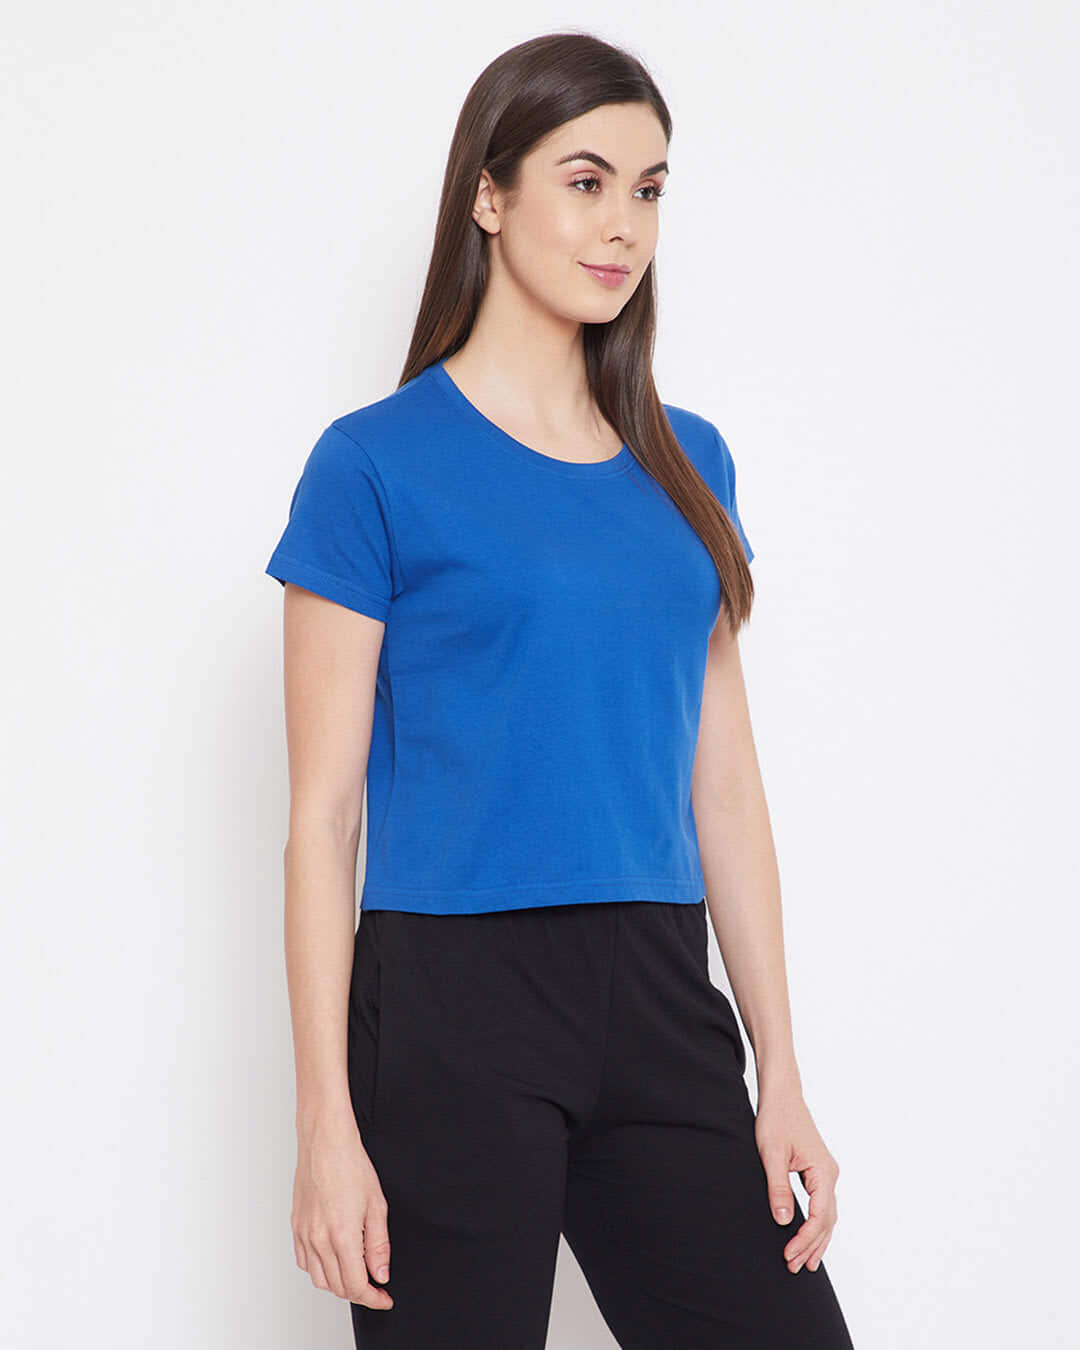 Shop Chic Basic Cropped Sleep Women's Tee in Royal Blue-Back